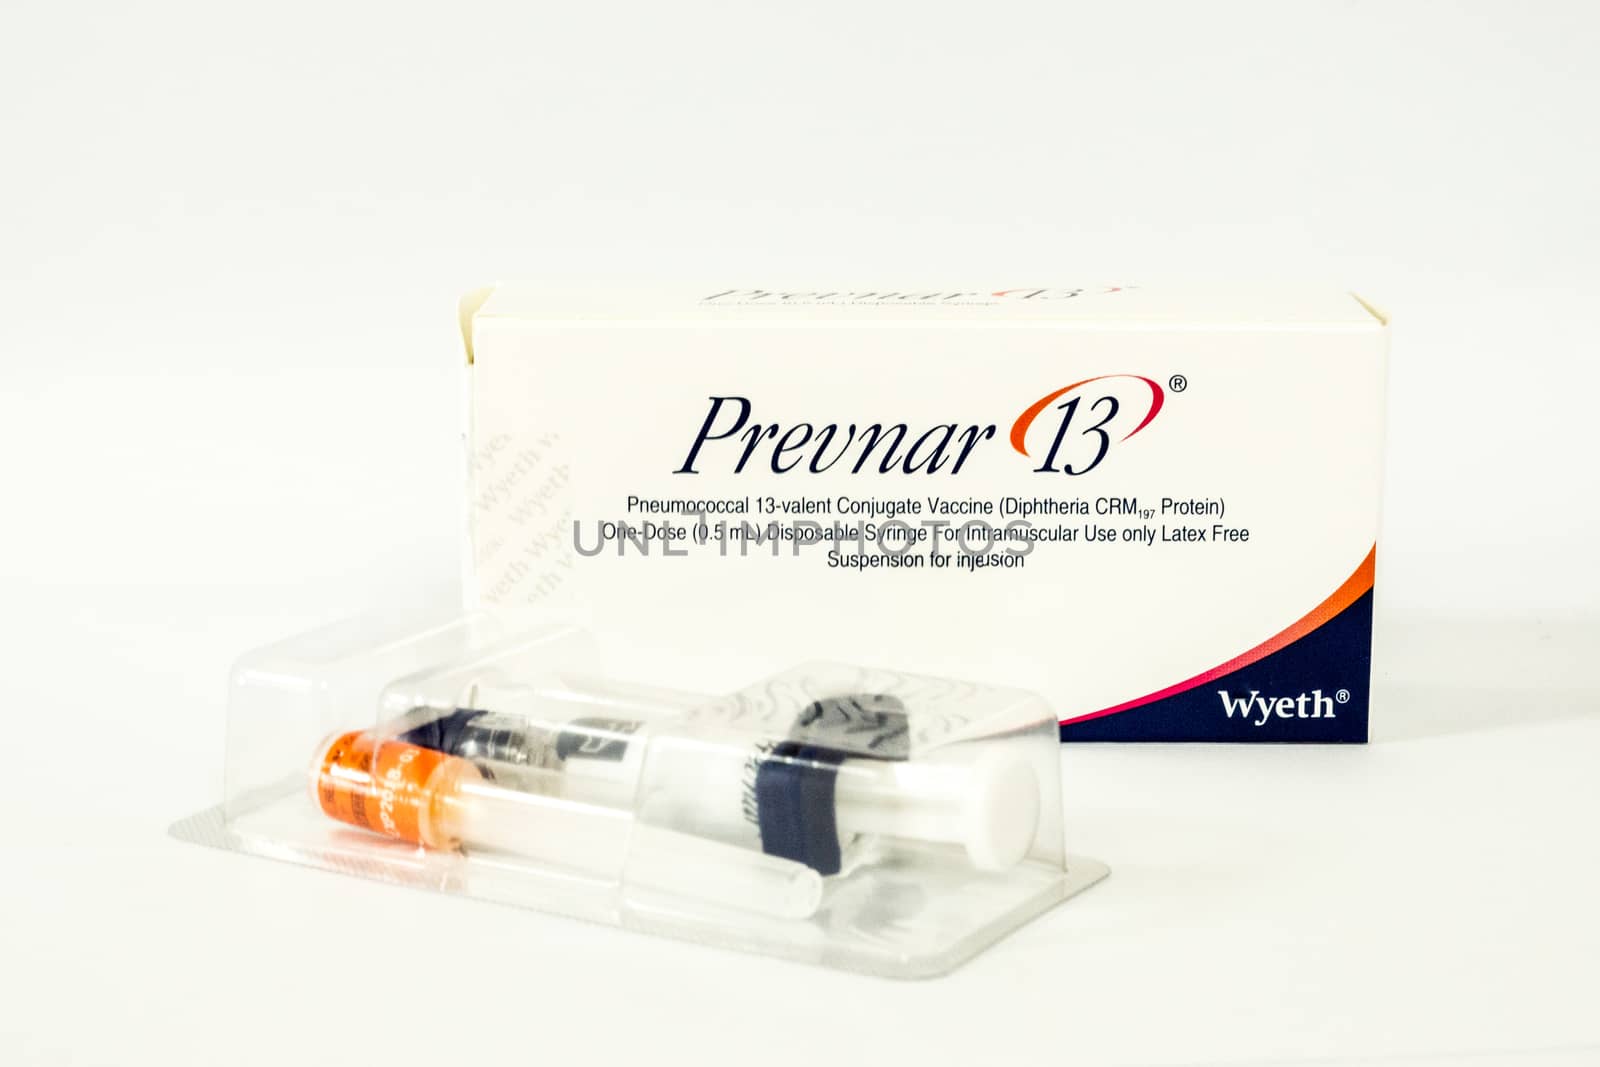 another package of pneumococcus vaccine( 13 valent) from Wyeth,shallow focus